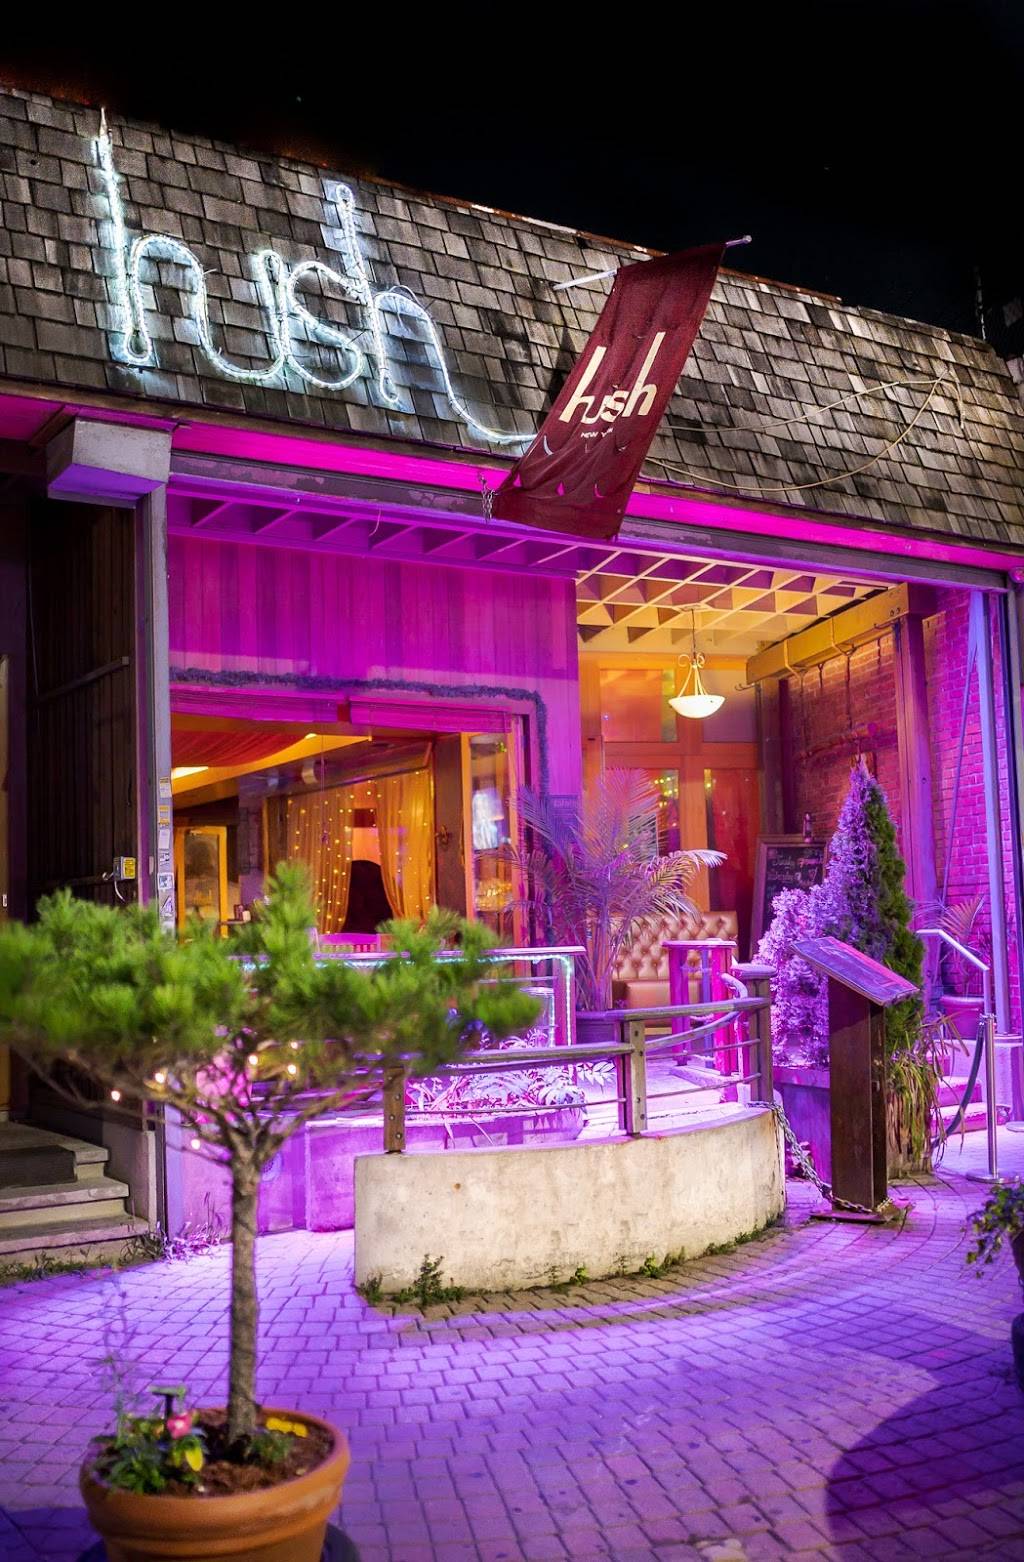 Hush Cafe Lounge and Garden | night club | 70-10 Grand Ave, Queens, NY 11378, USA | 7187796061 OR +1 718-779-6061